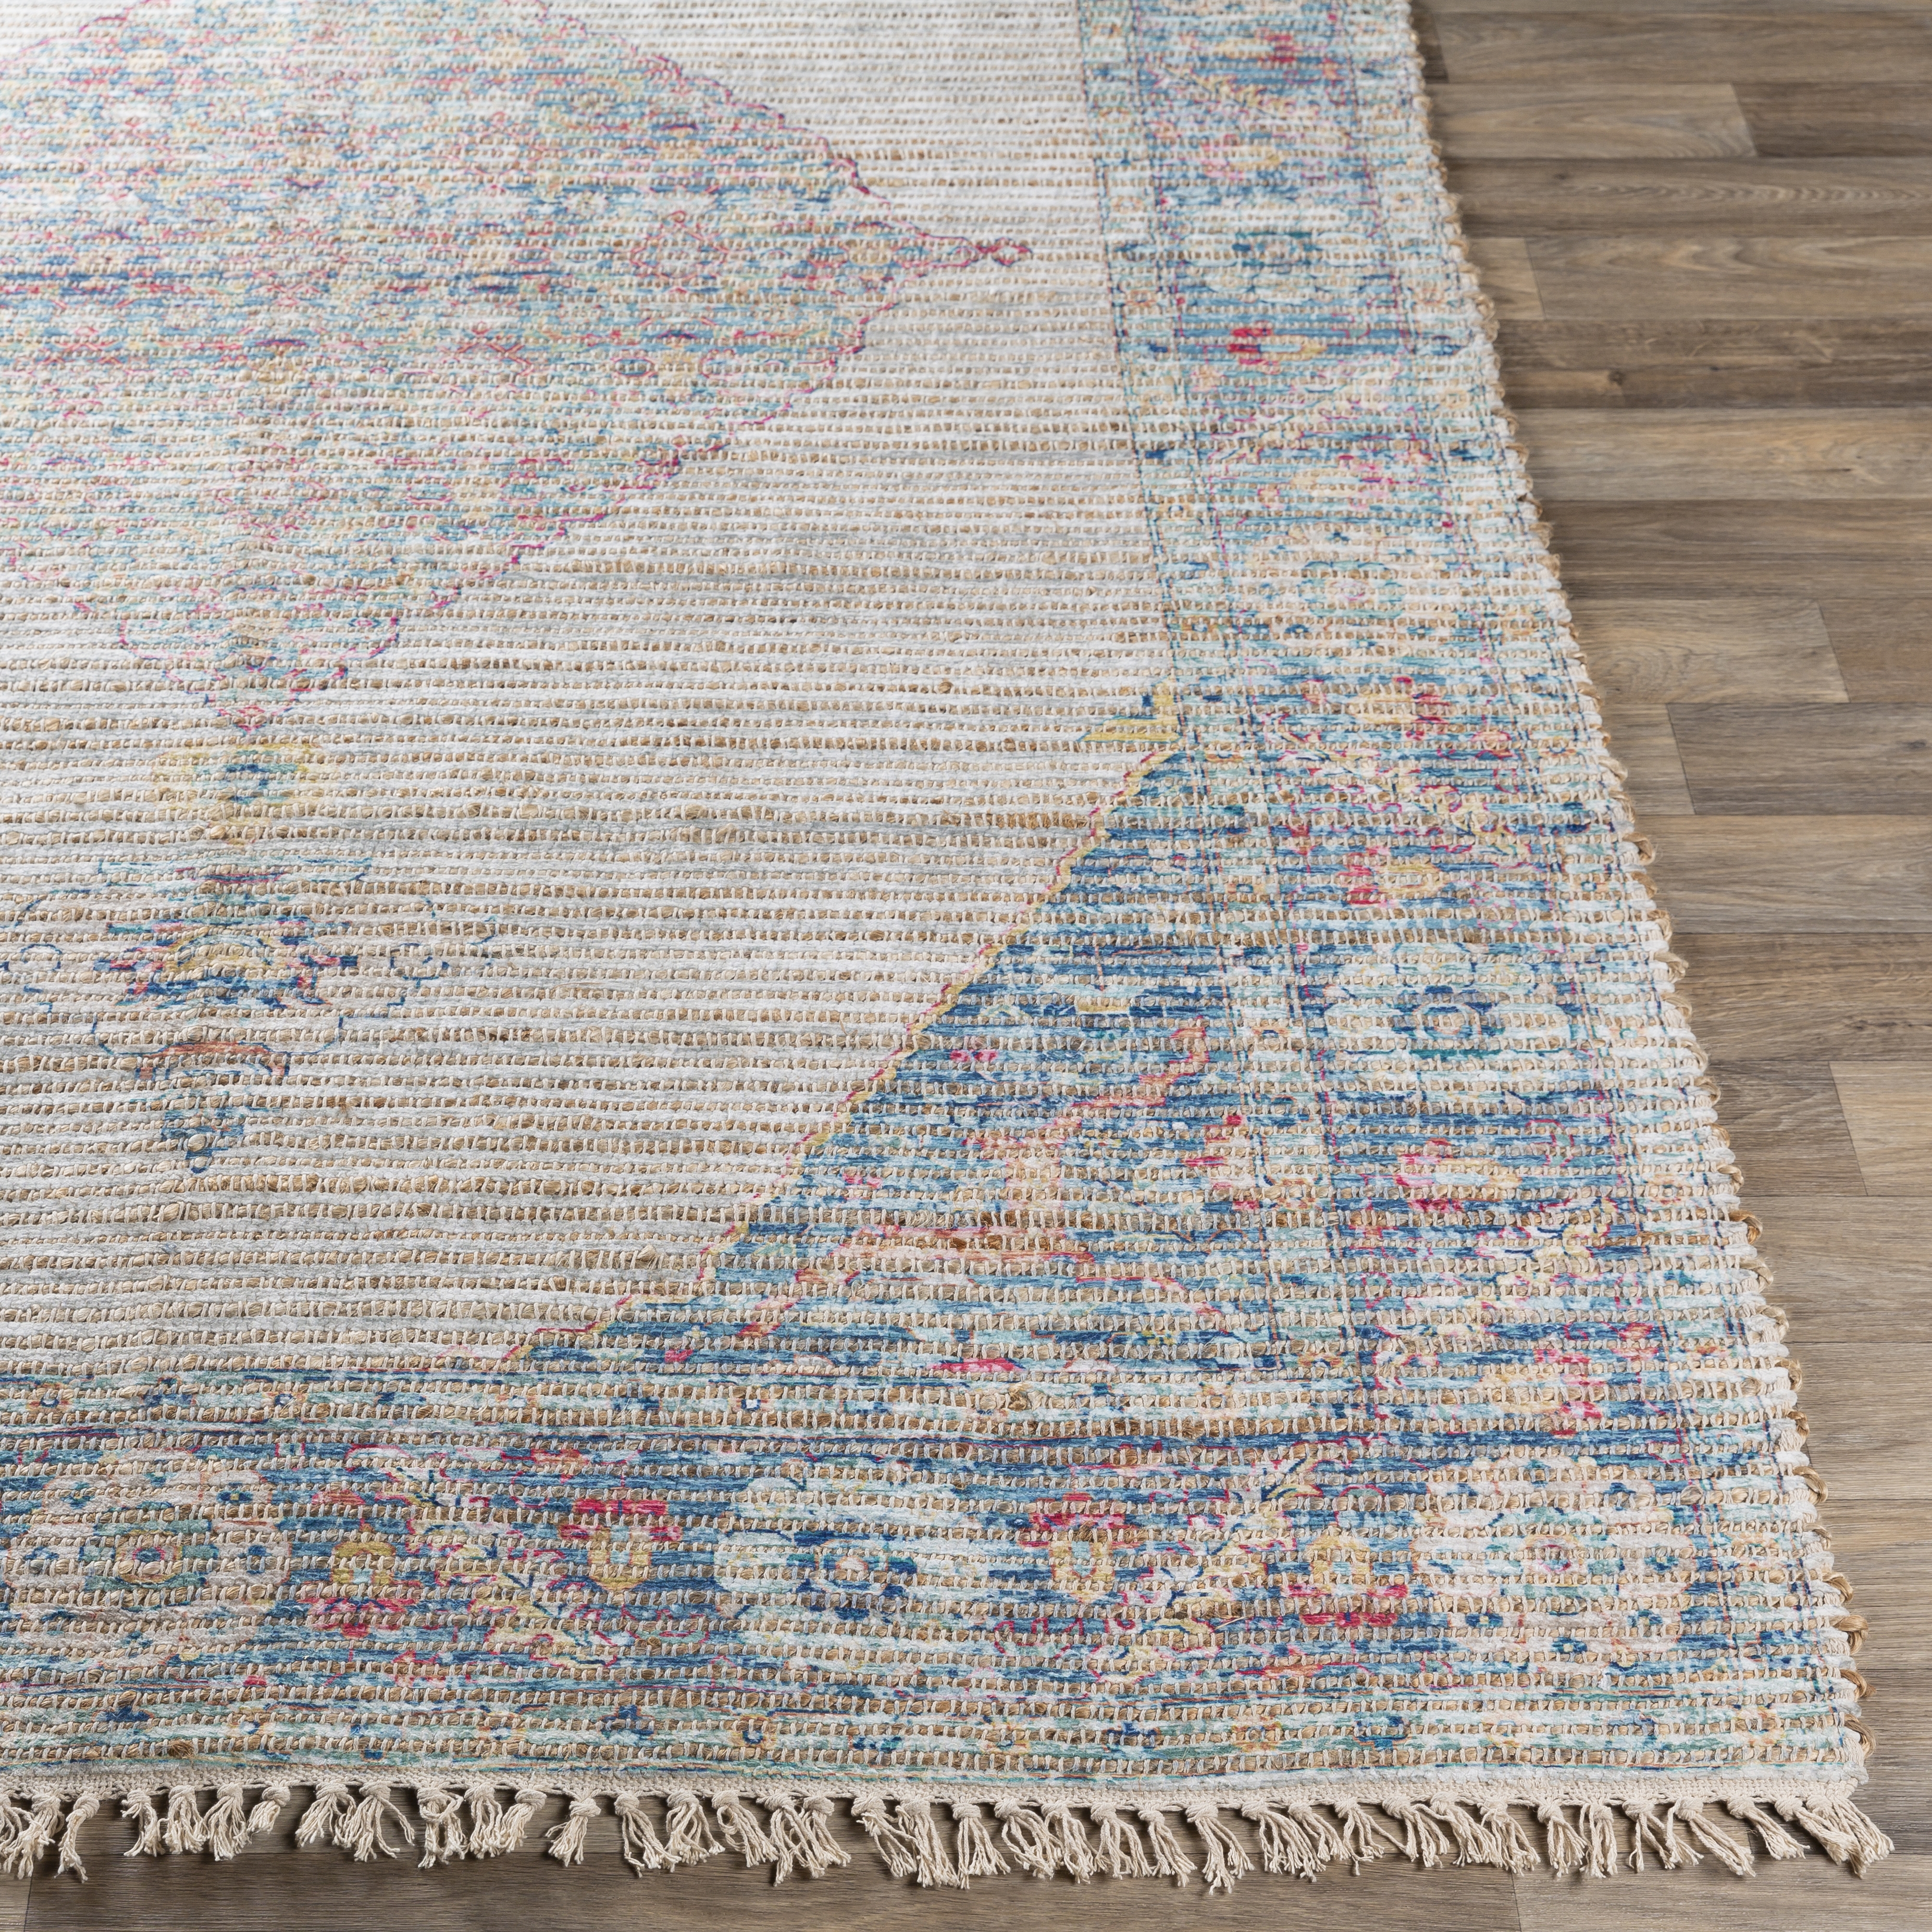 Coventry Rug, 2' x 3' - Image 2